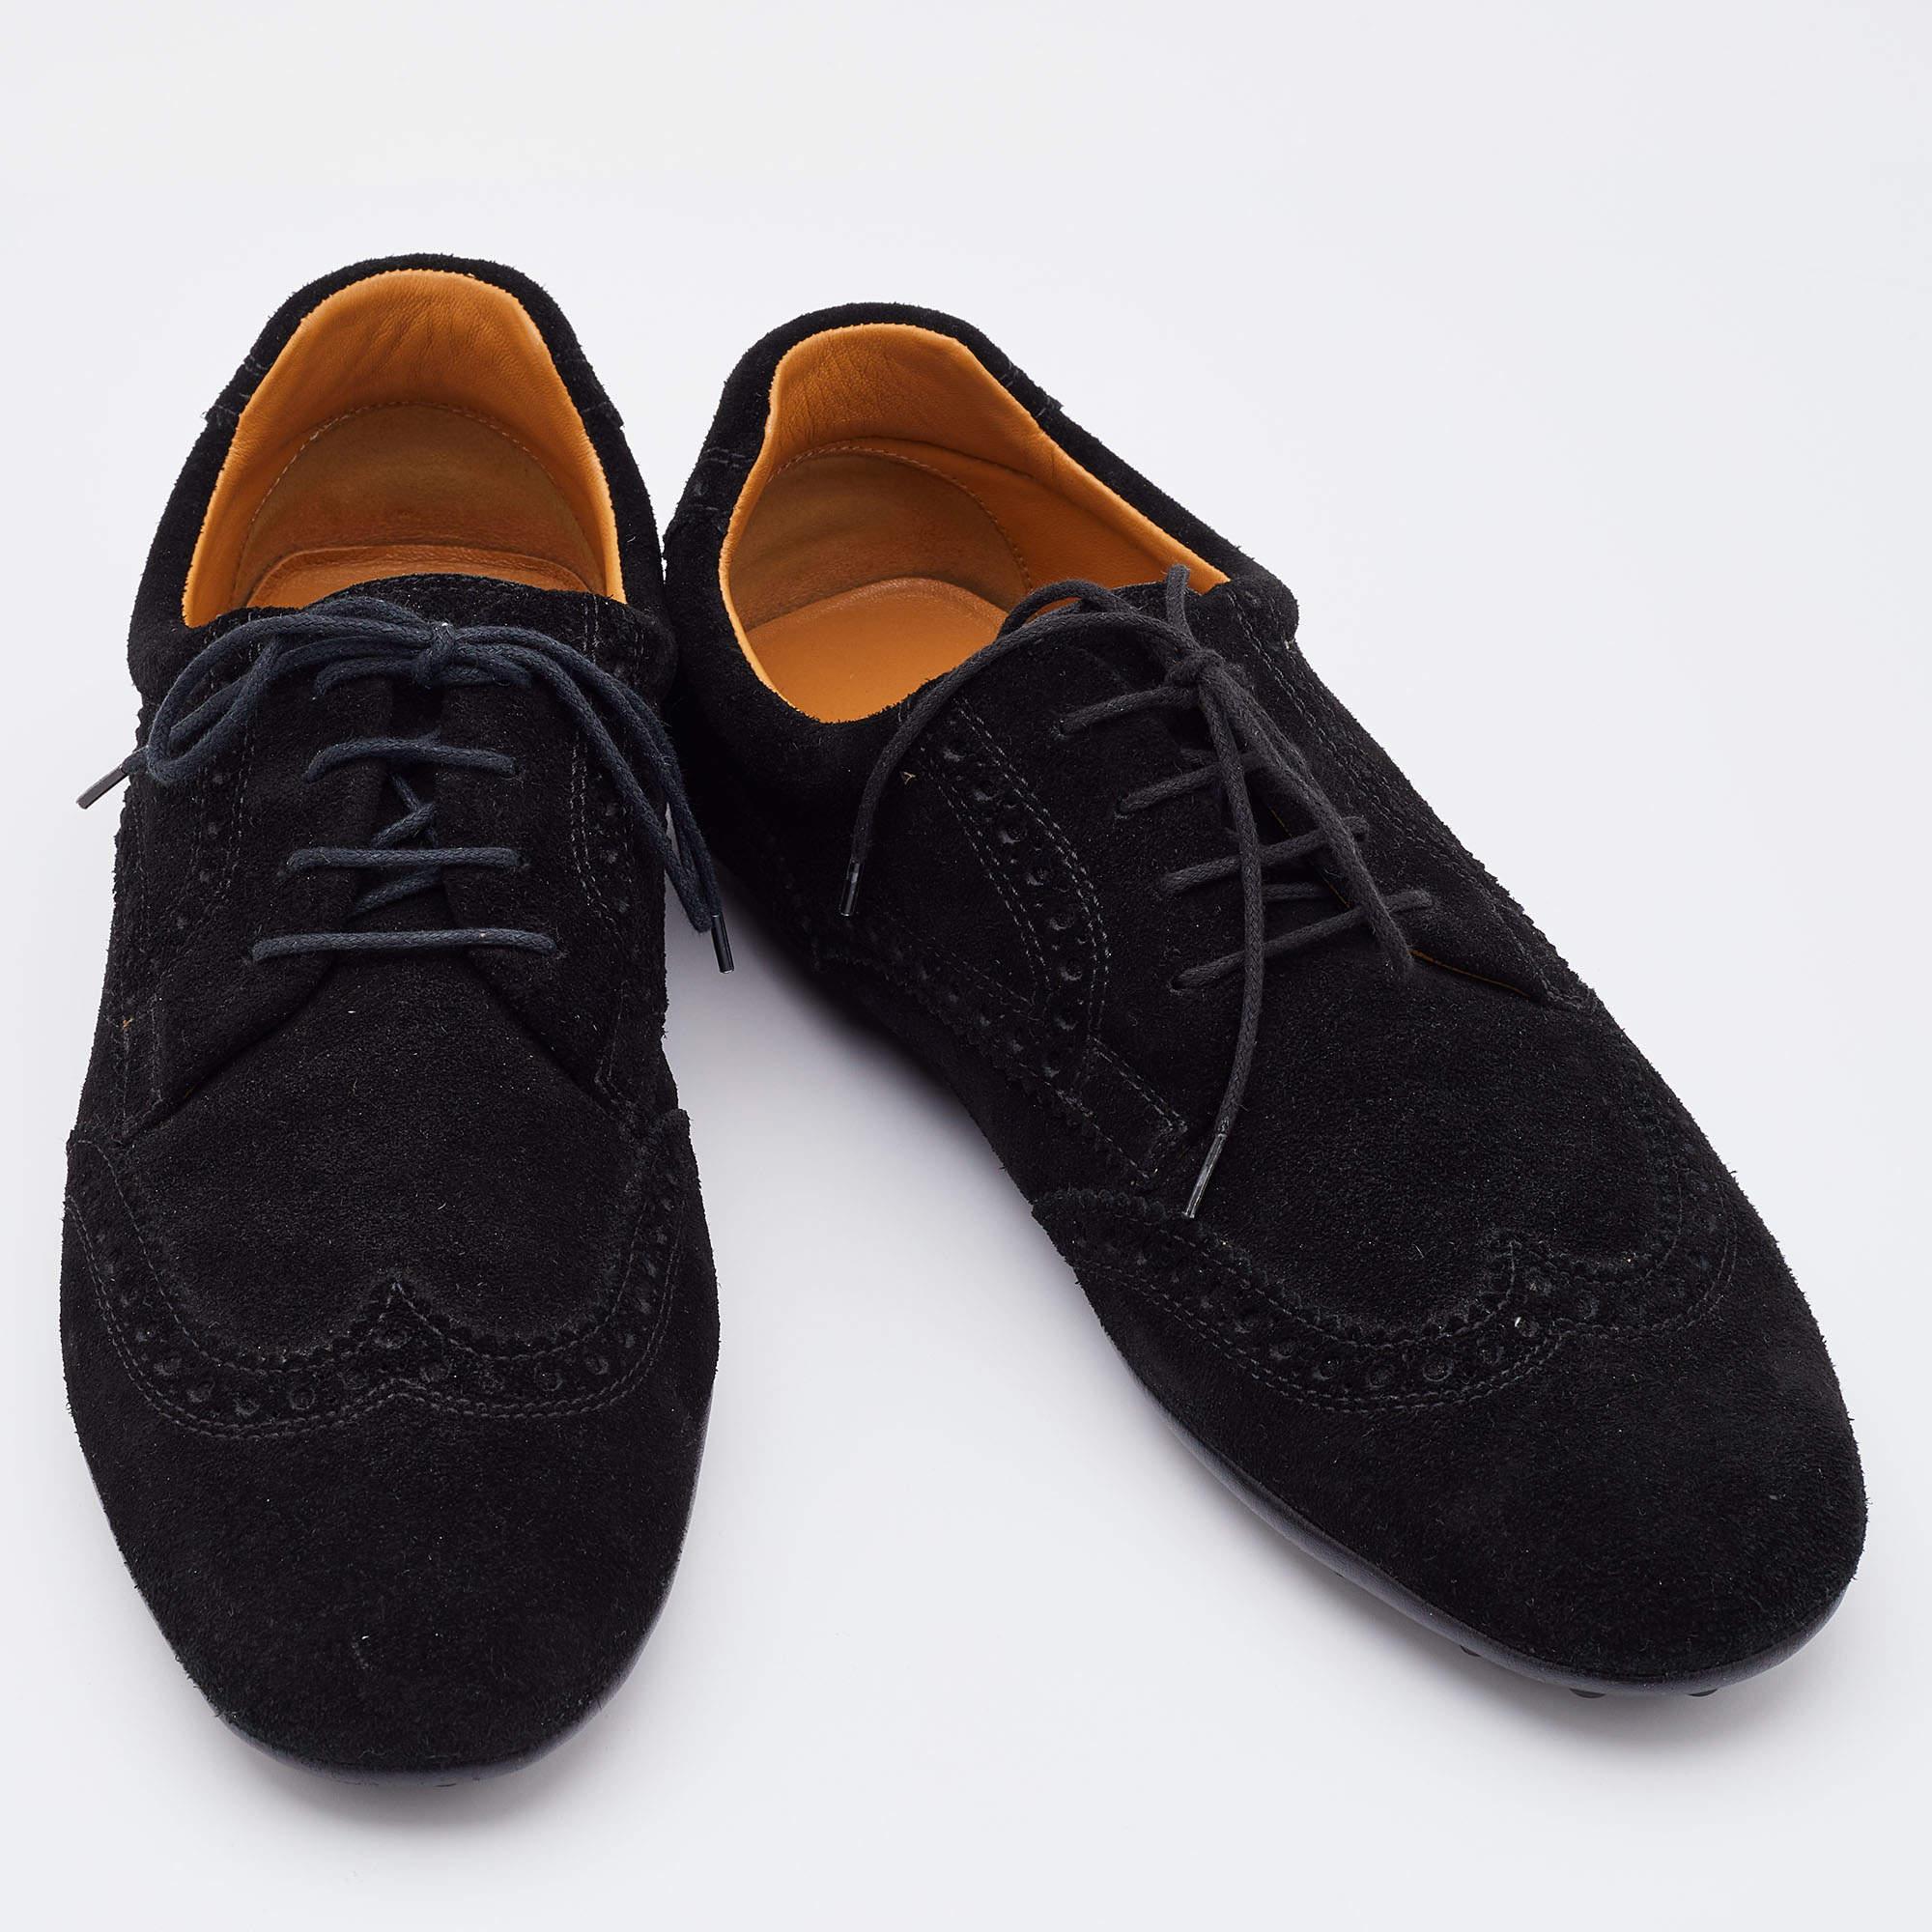 These loafers are durable and classy. Created from quality materials, it features relaxing footbeds and will lend you optimal grip while walking.

